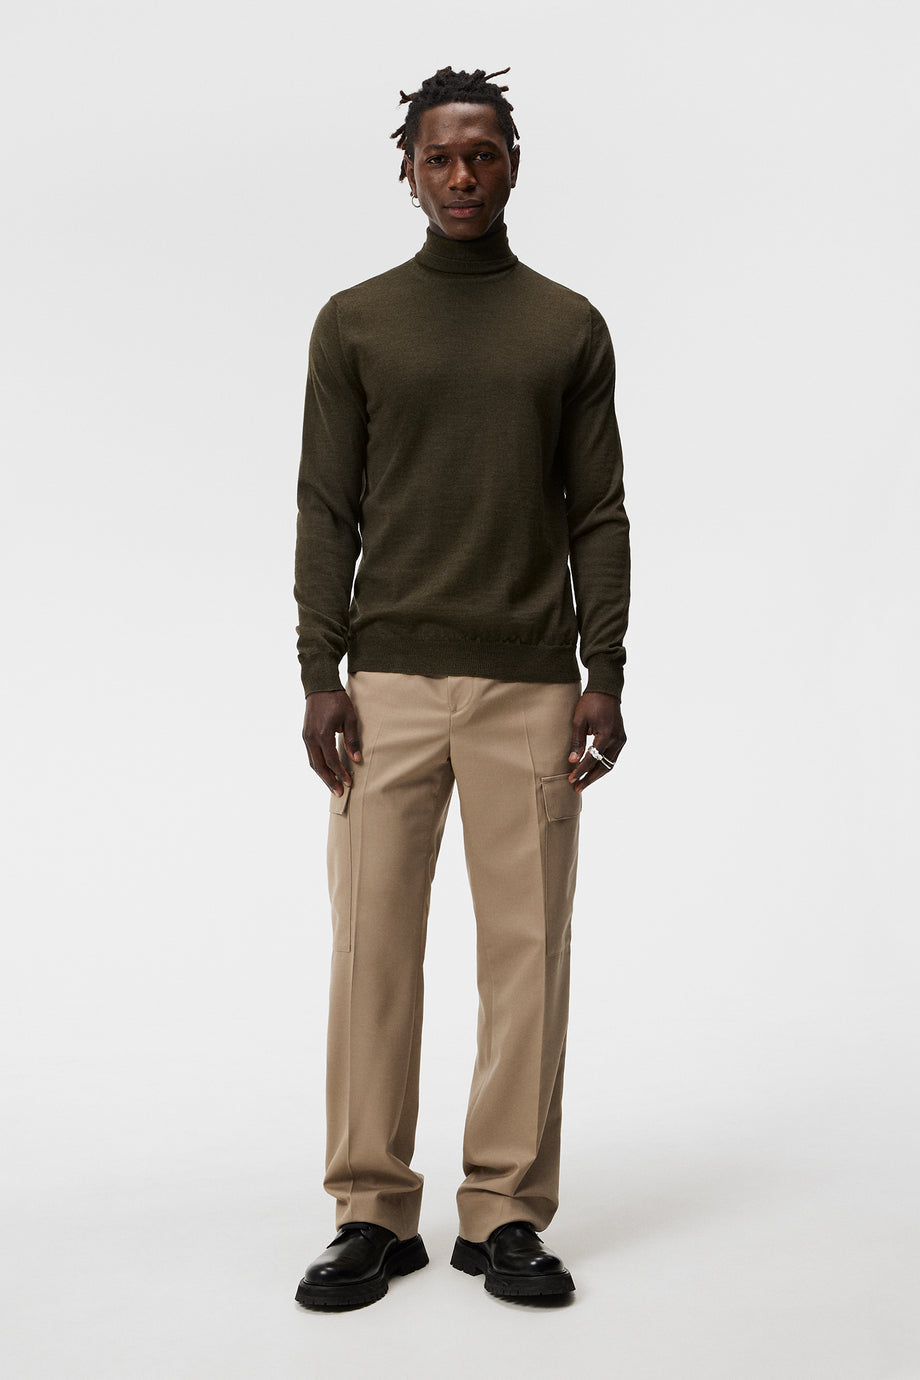 Lyd Merino Turtleneck Sweater / Forest Green